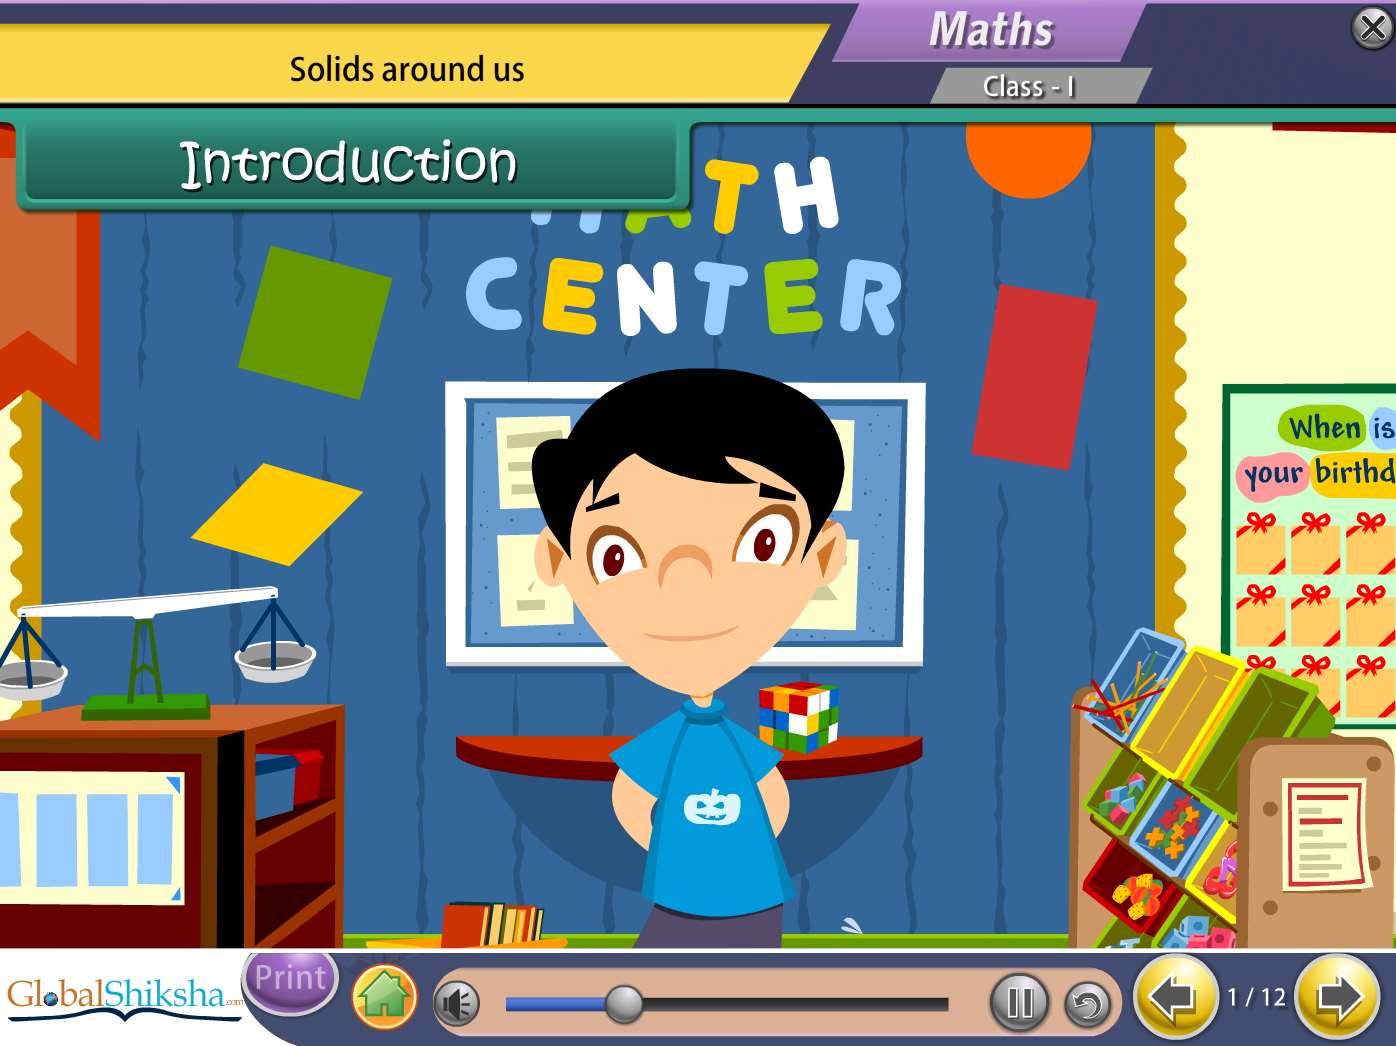 Tamil Nadu State Board Class 1 Maths & Science Animated Pendrive in English